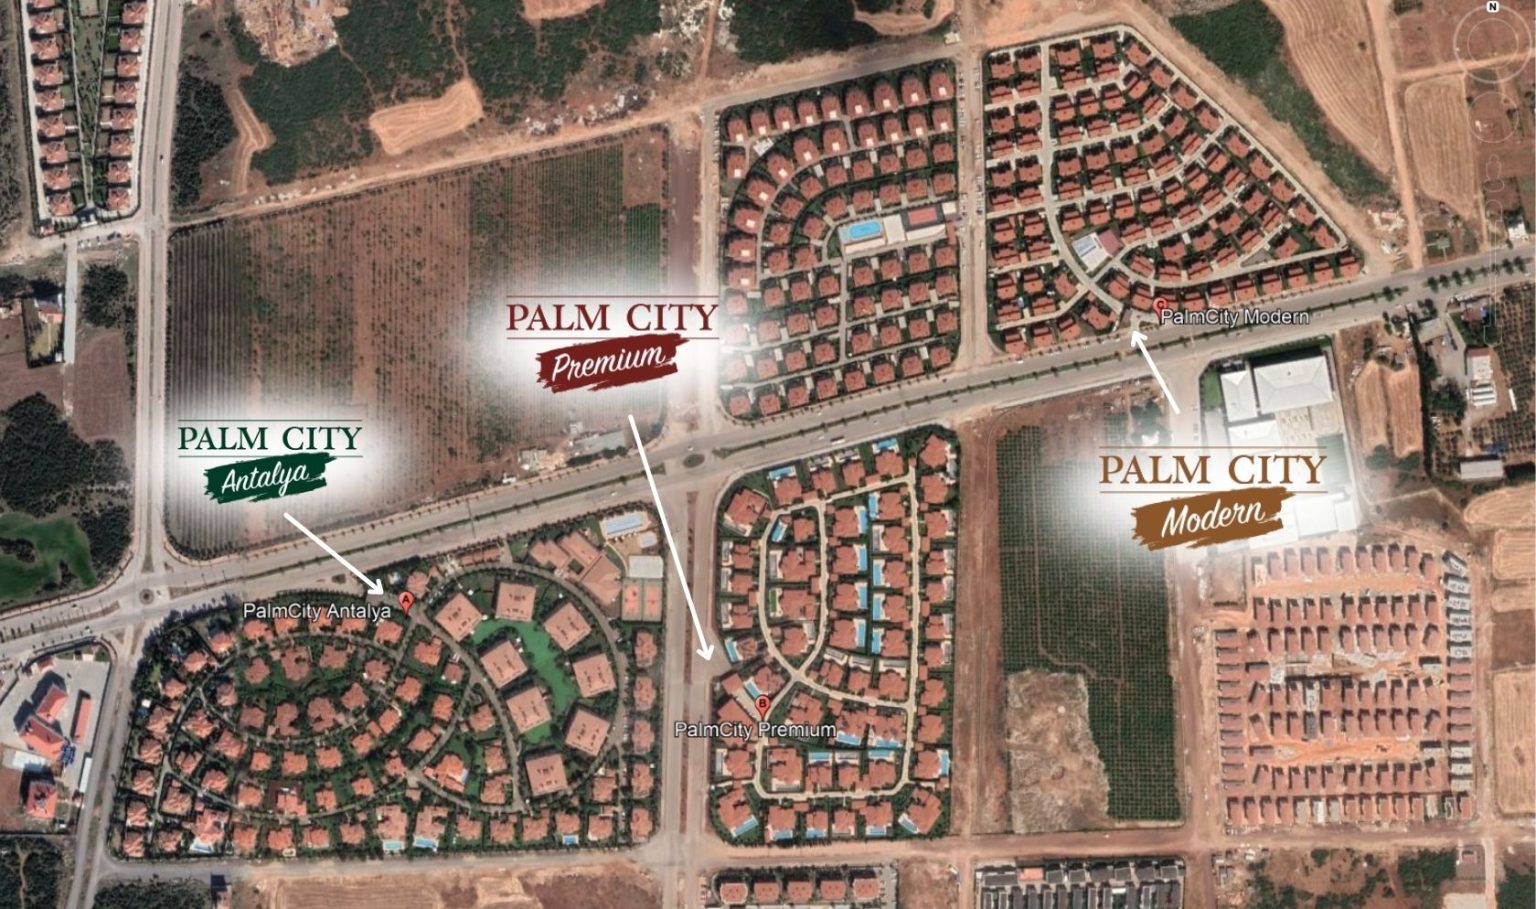 Palm City Overview